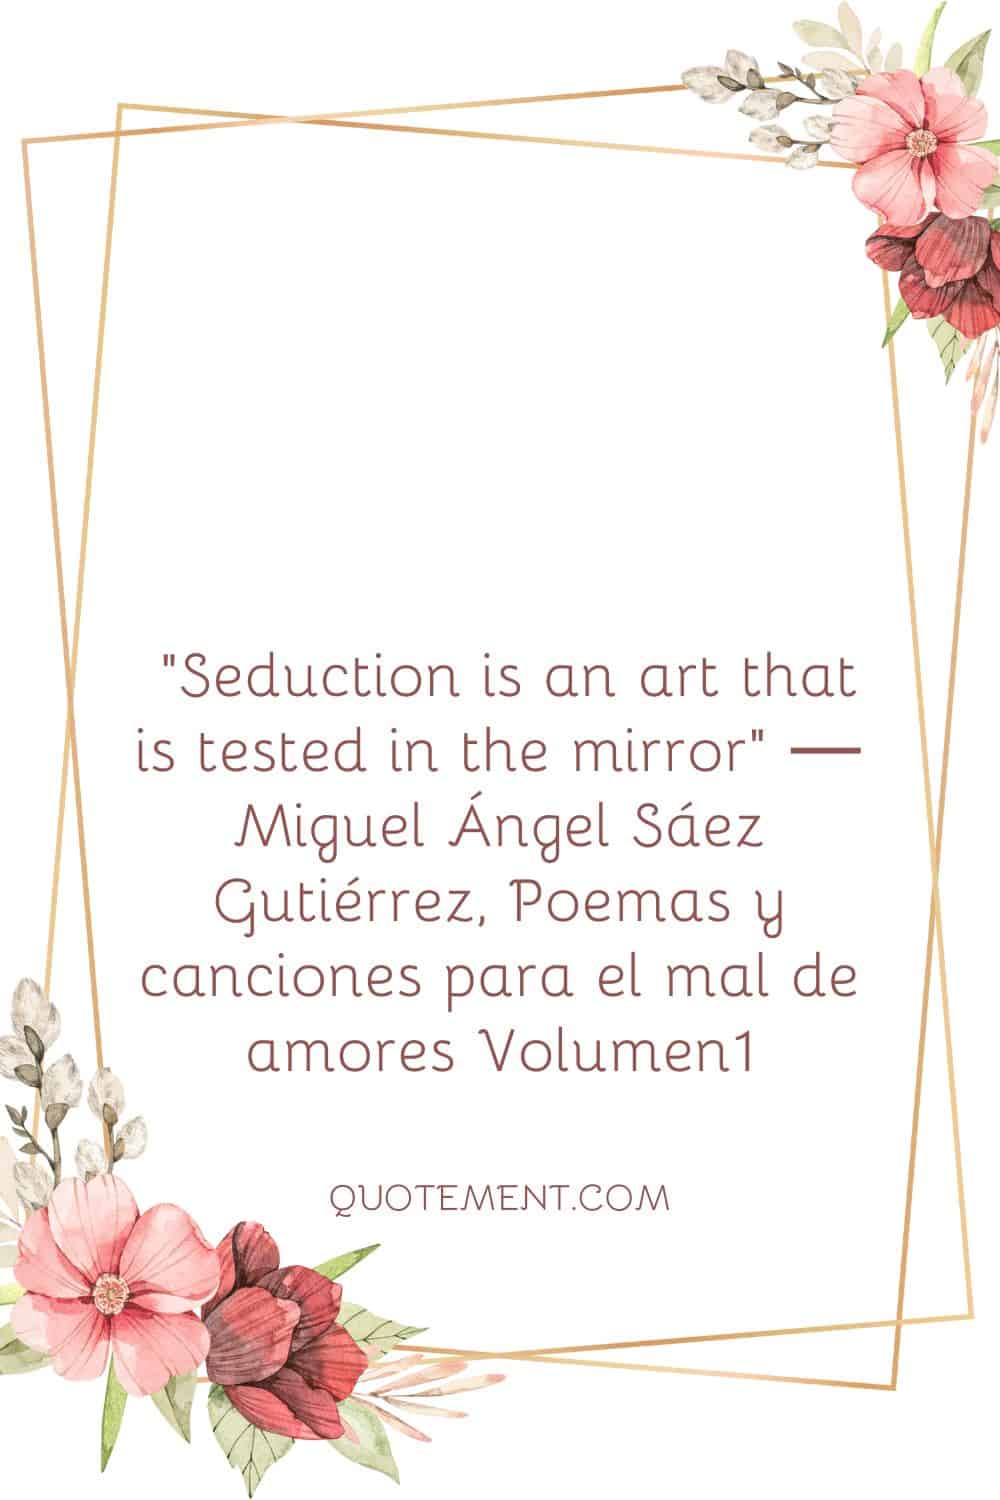 Seduction is an art that is tested in the mirror